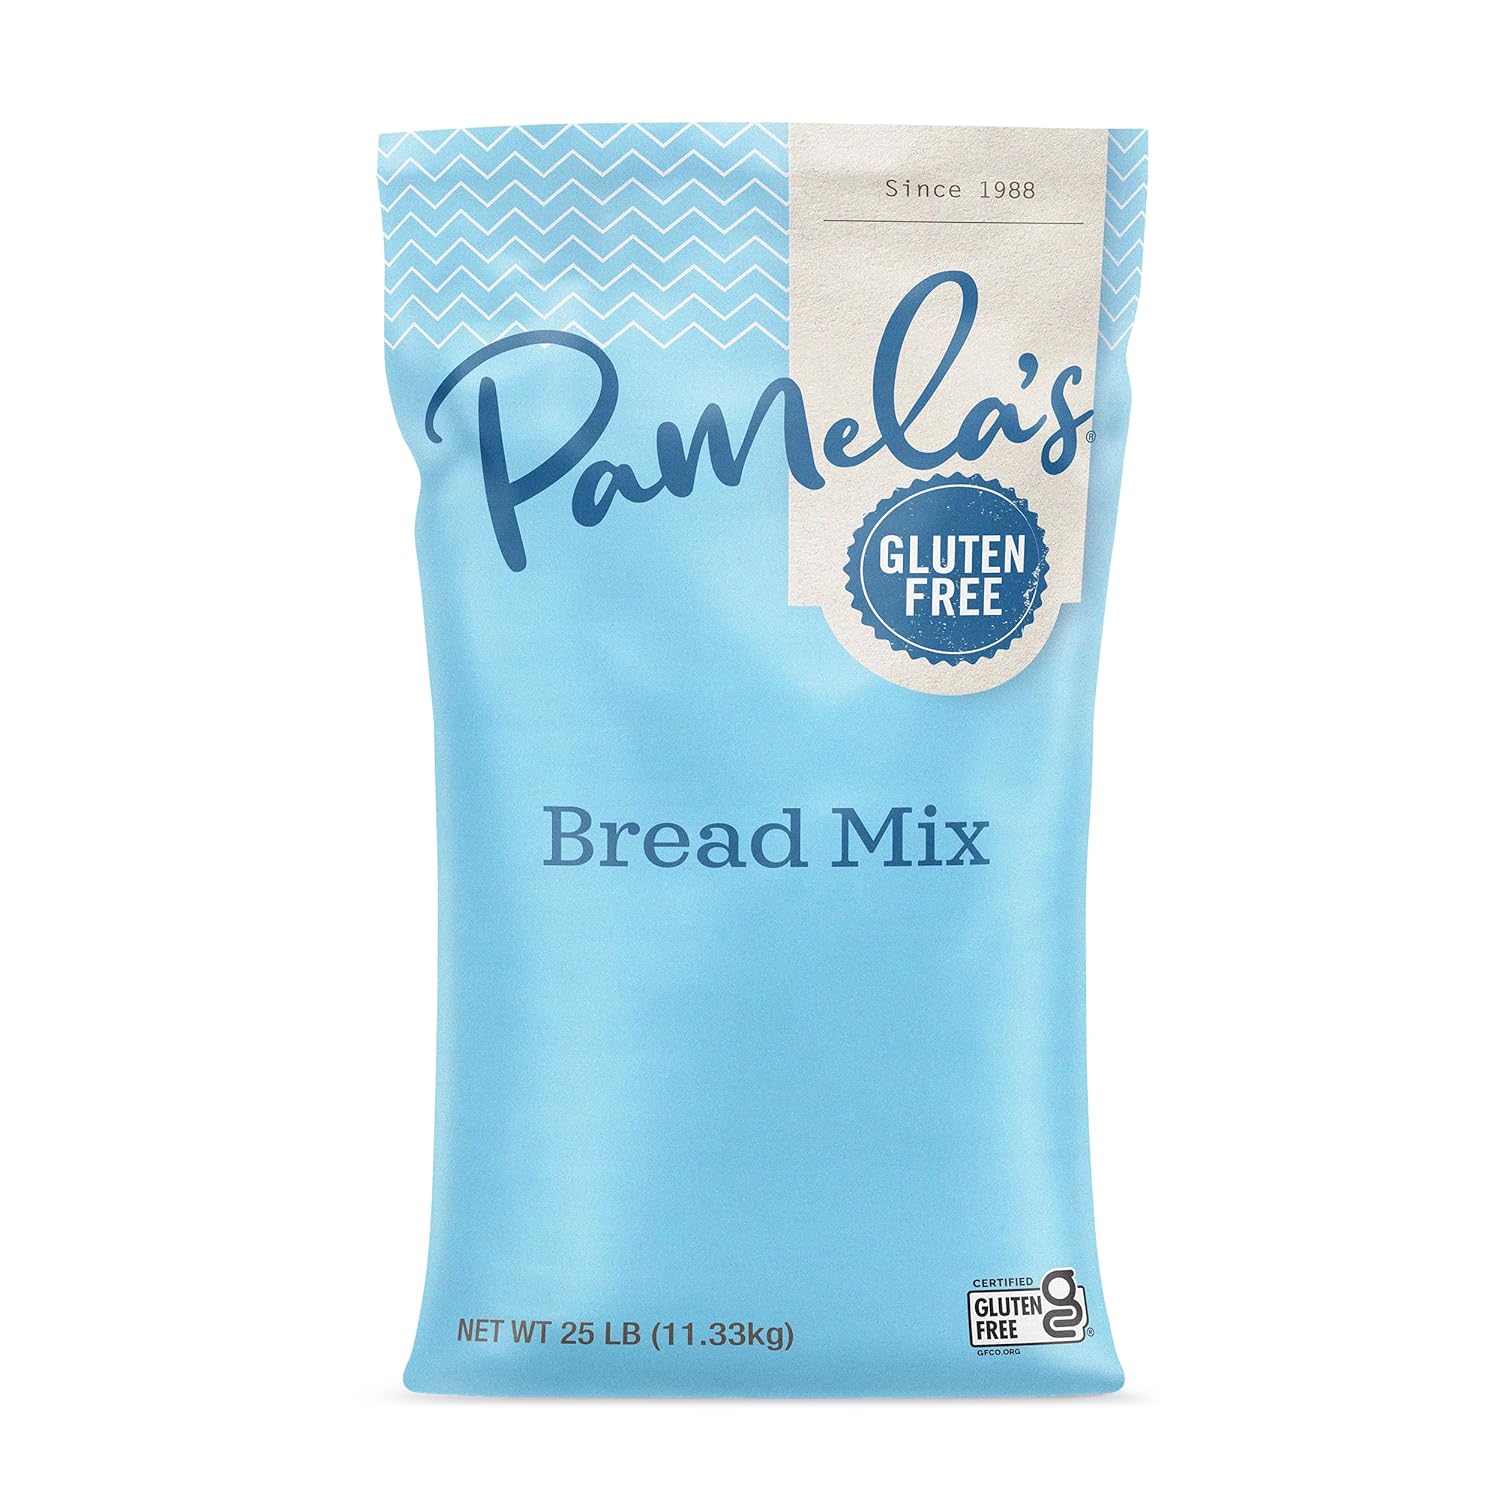 Pamela's Gluten Free Bread Mix, Multi-Purpose, Dairy Free, Whole Grain, Foodservice Size, 25-Pound Bag (Pack of 1)